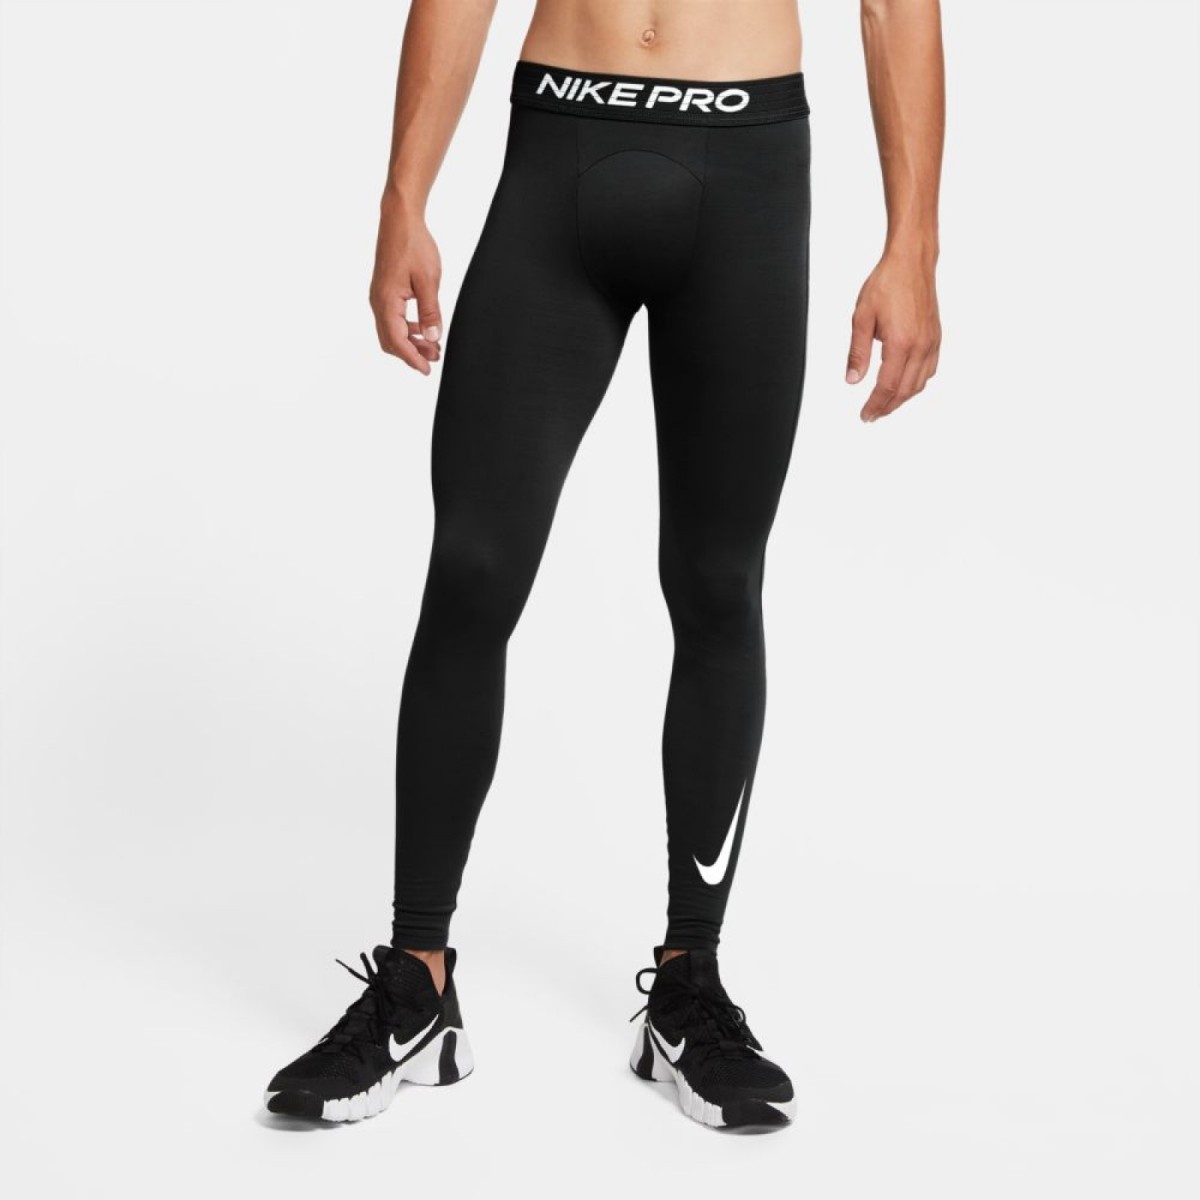 The Nike Pro Warm Tights are made of sweat-wicking fabric with ribbed ...